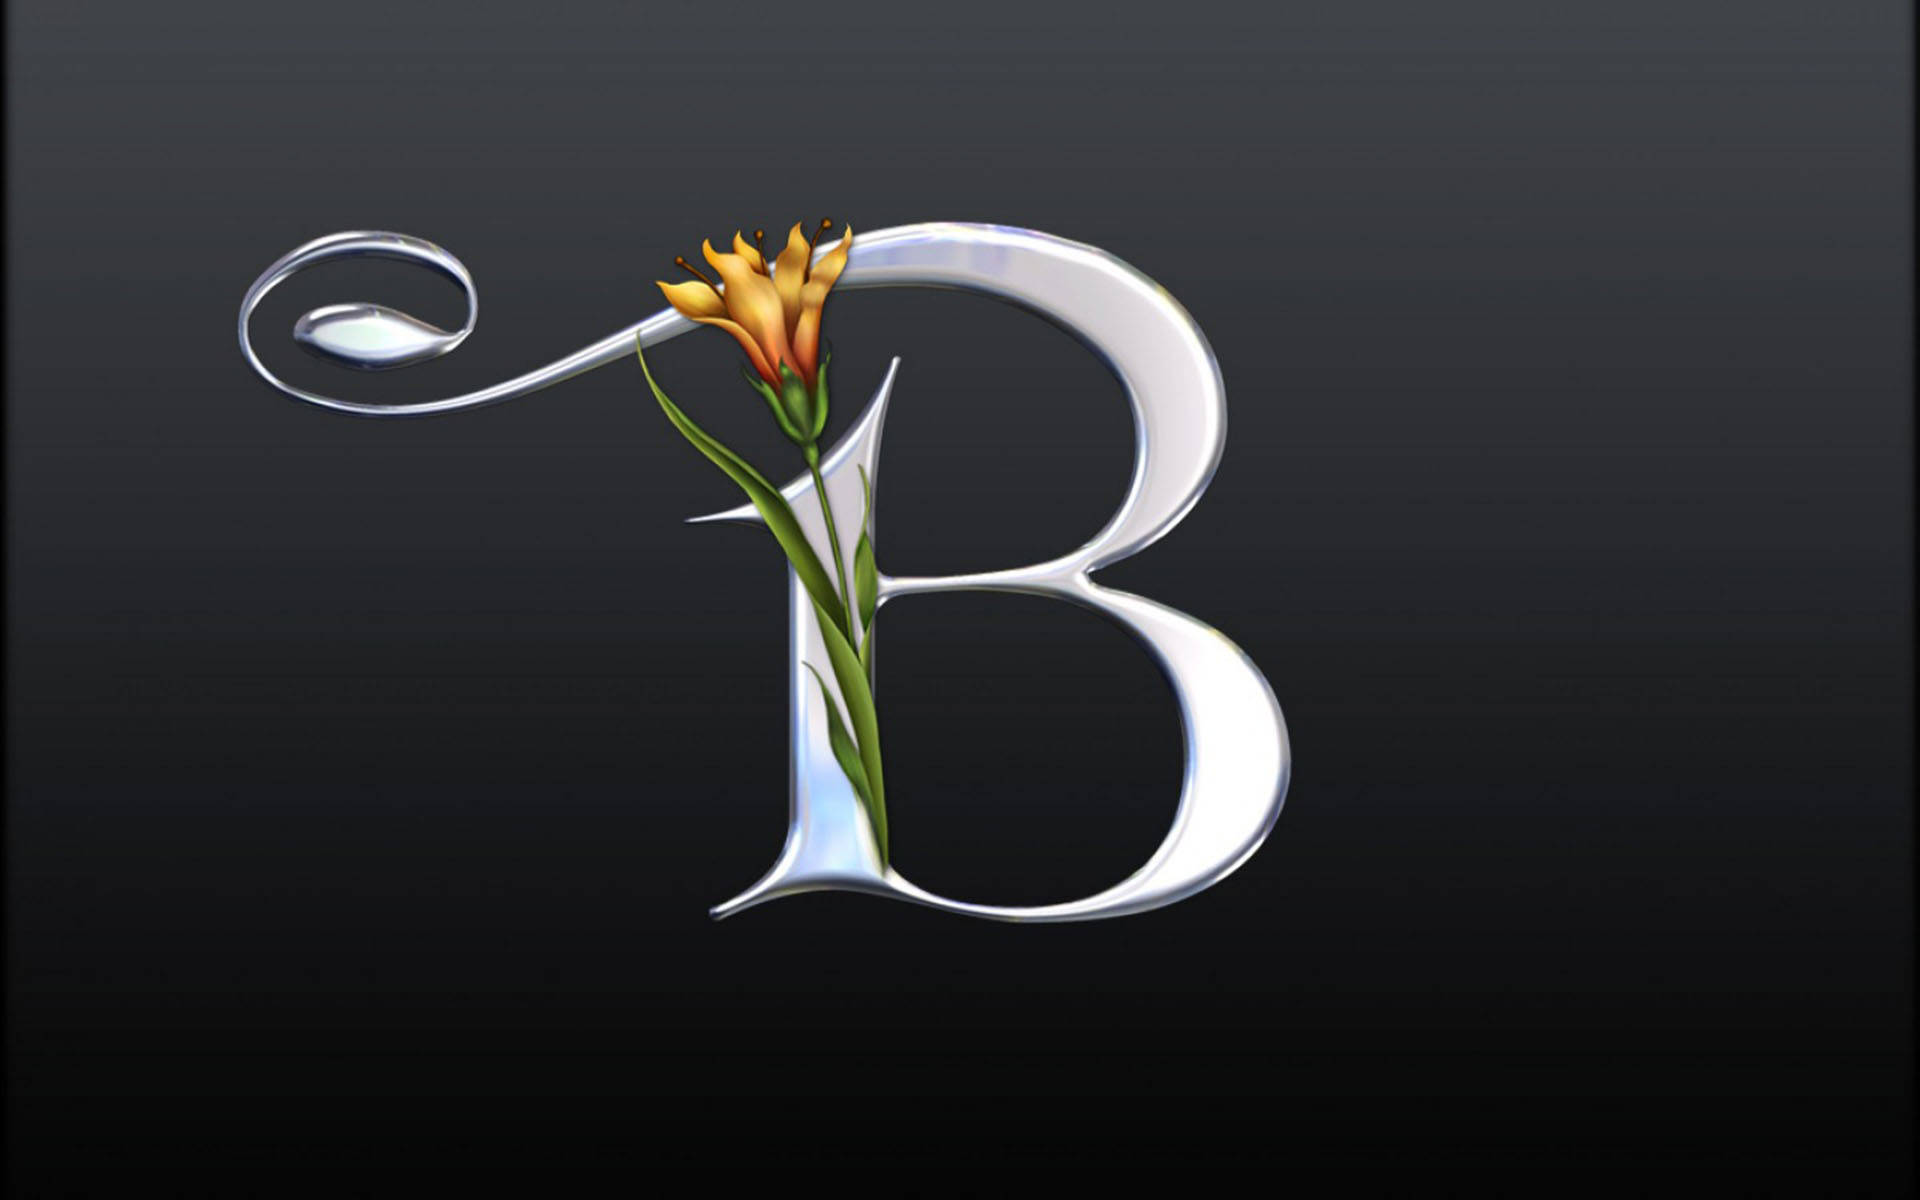 Silver Plated Letter B Wallpaper